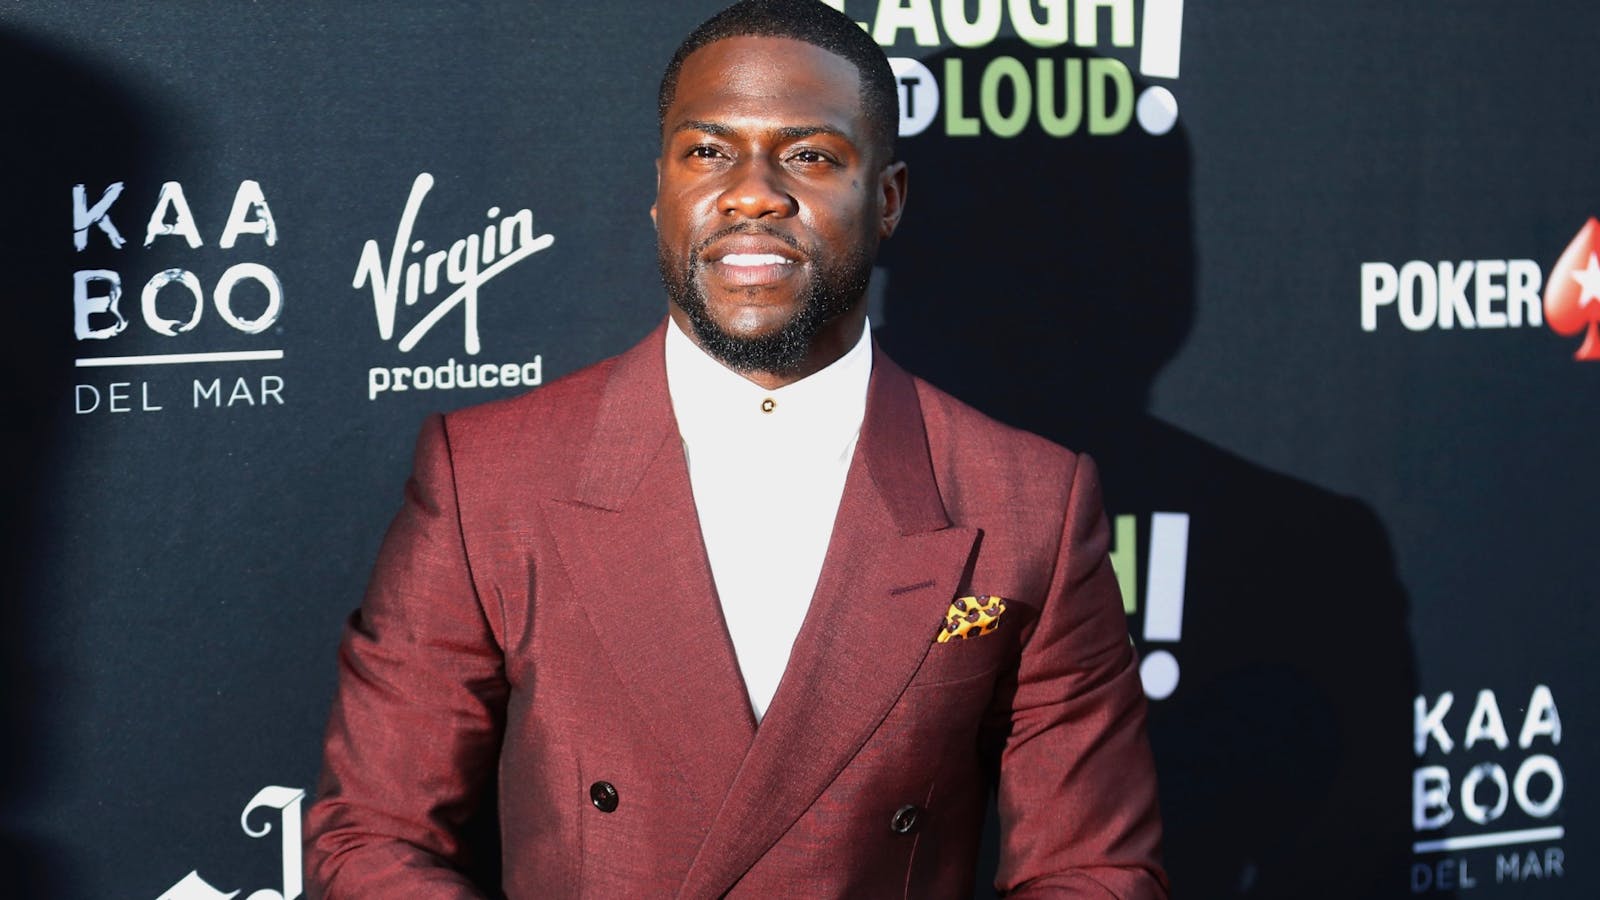 Laugh Out Loud, the comedy network launched by Kevin Hart, above, and Lionsgate, has fared better than some other subscription streaming services. Photo: AP